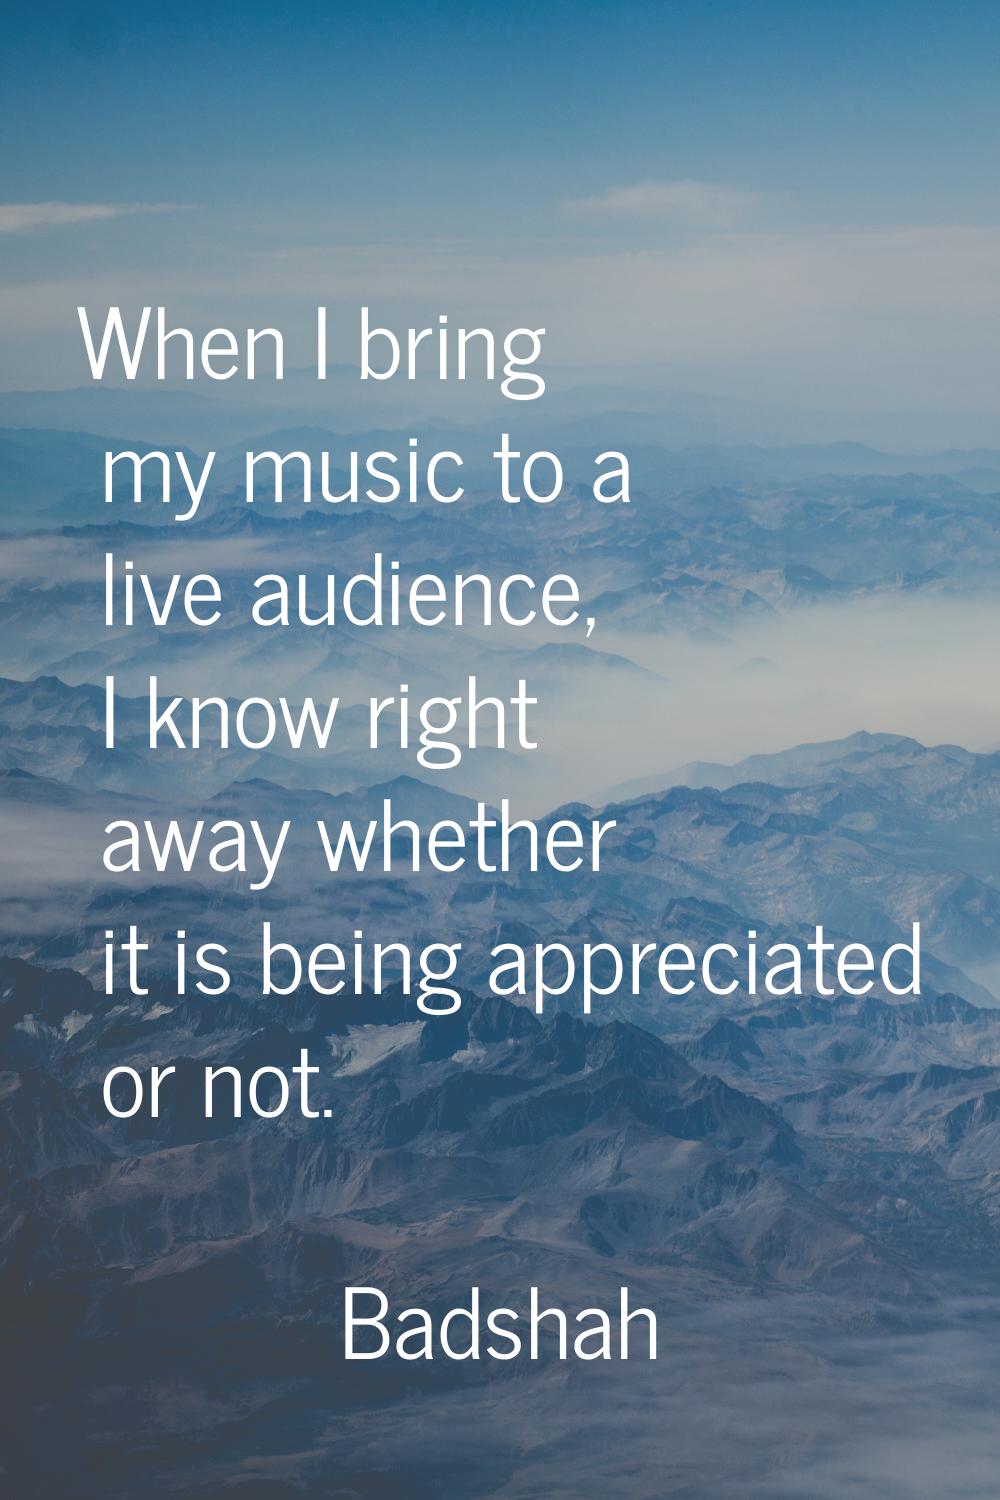 When I bring my music to a live audience, I know right away whether it is being appreciated or not.